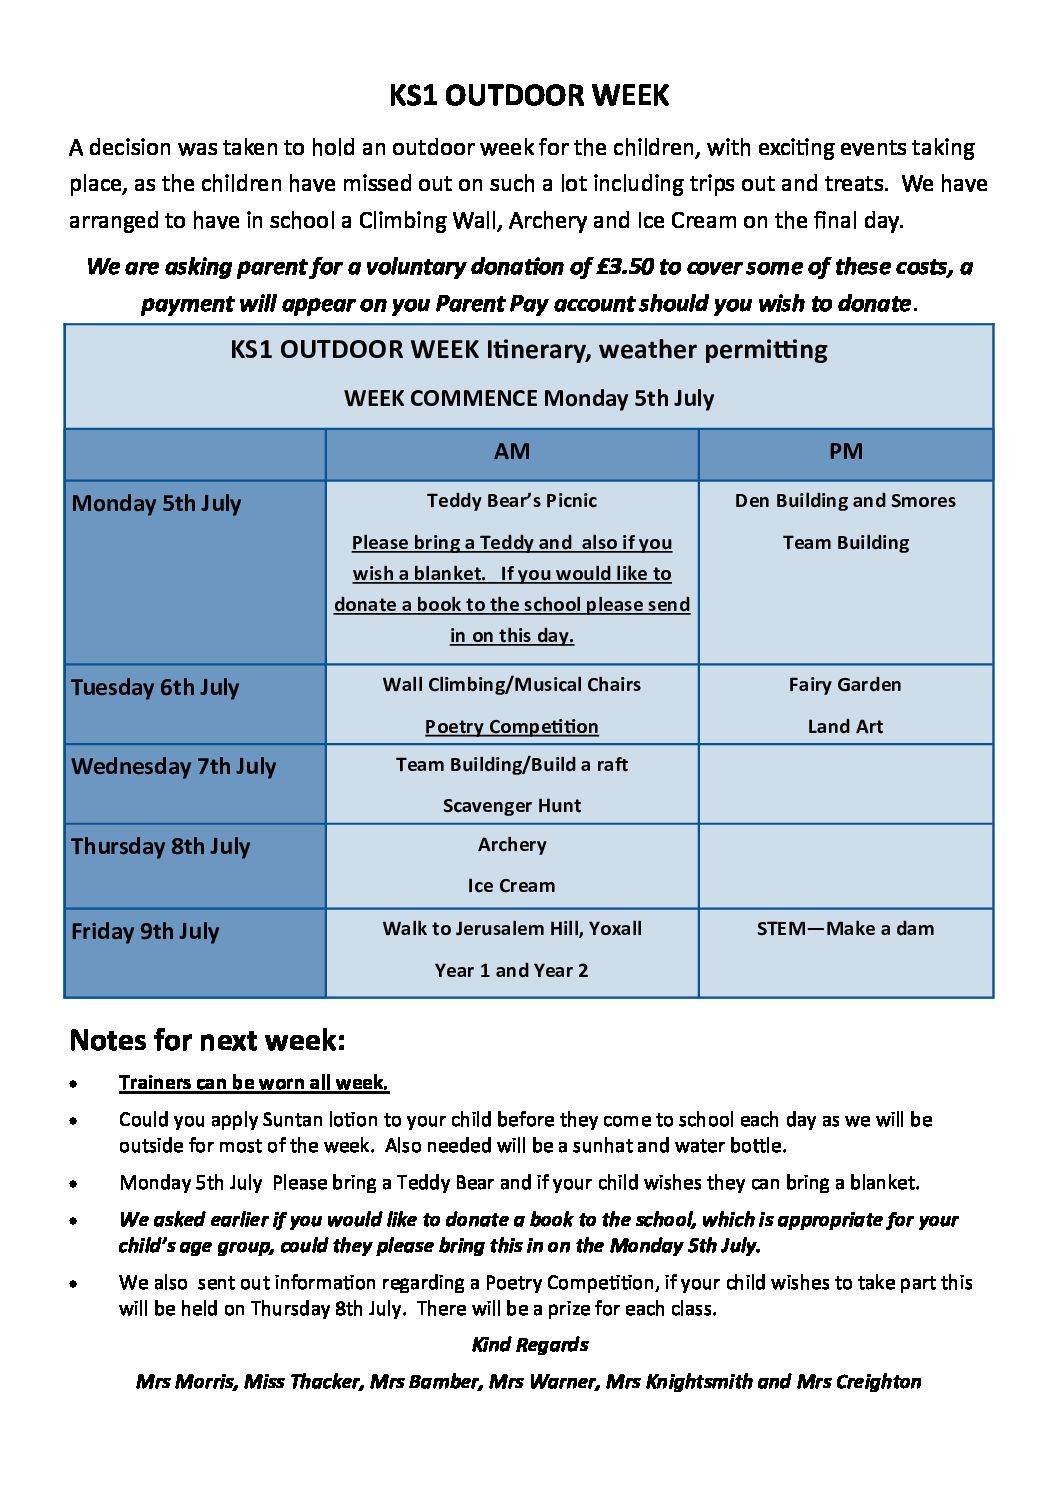 KS1 – Outdoor Week Commencing Monday 5th July